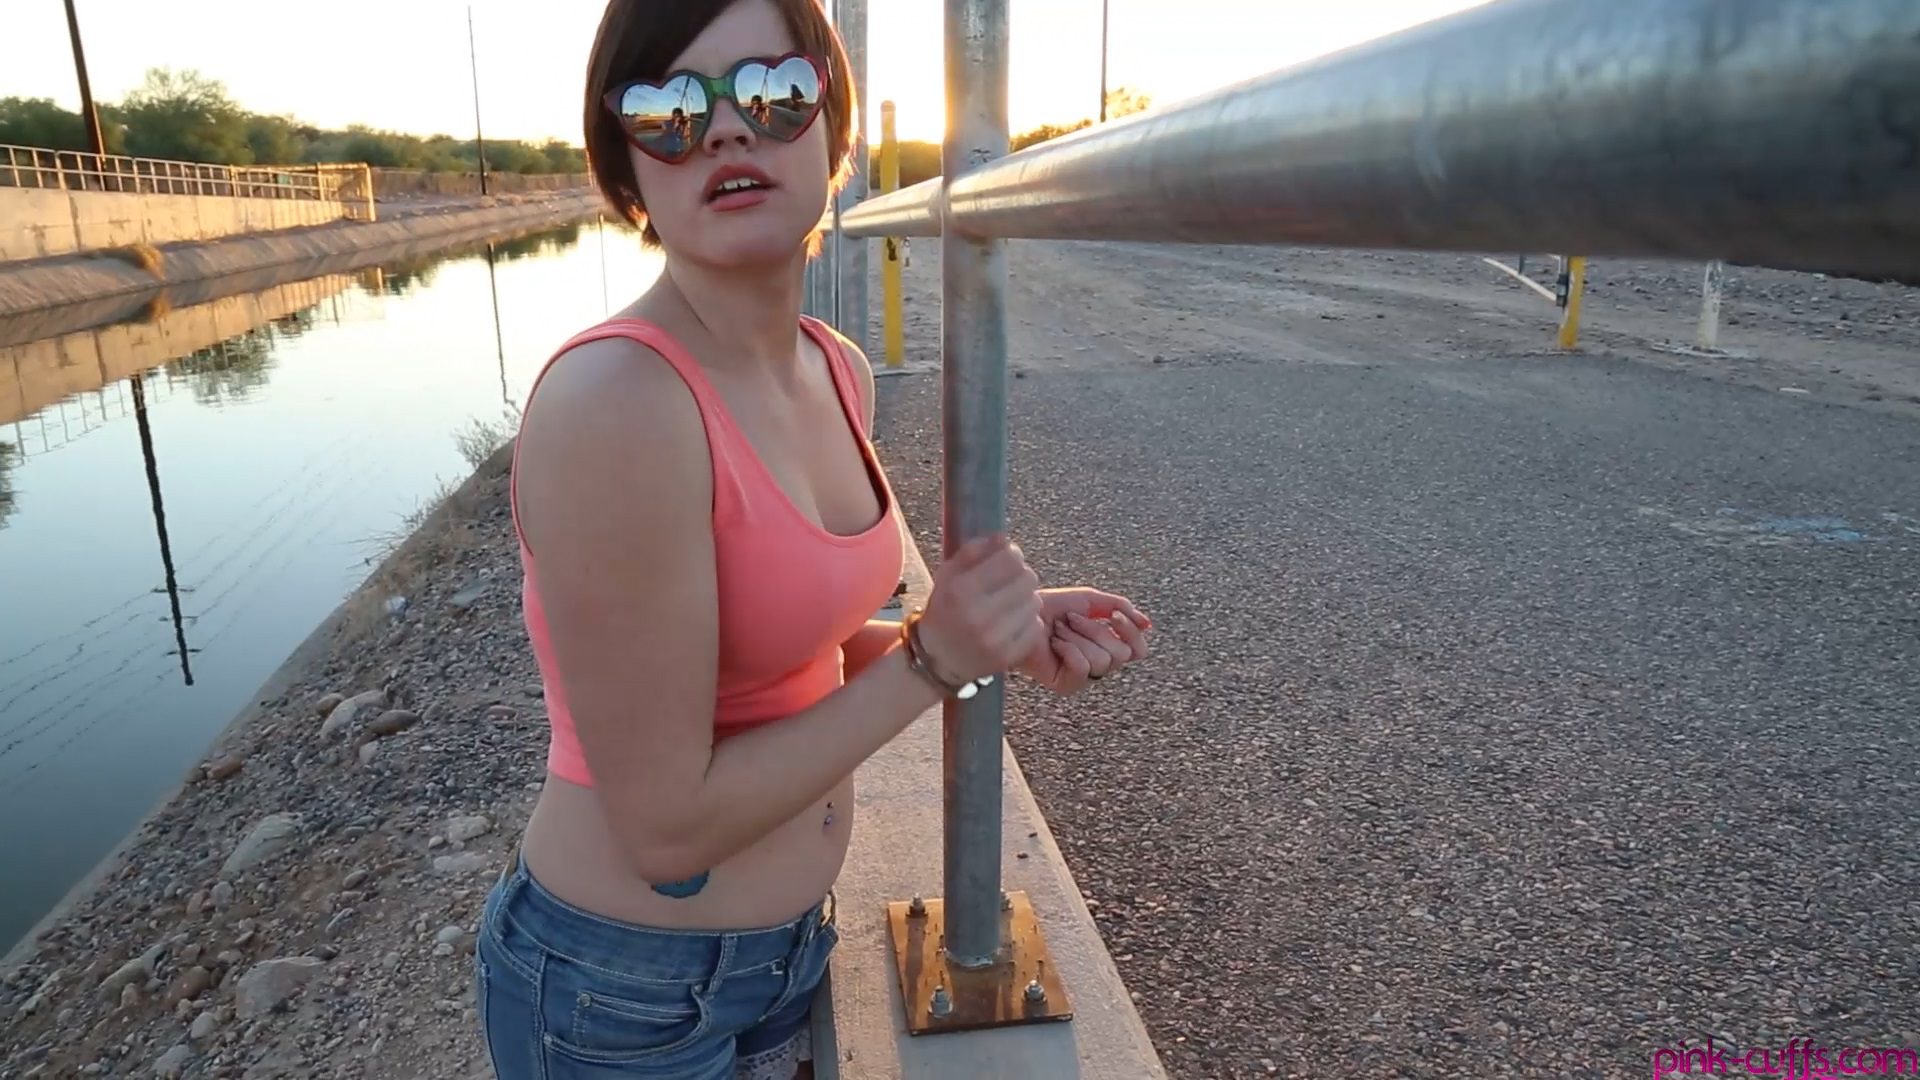 Violet Pixie is cuffed to a railing and left there